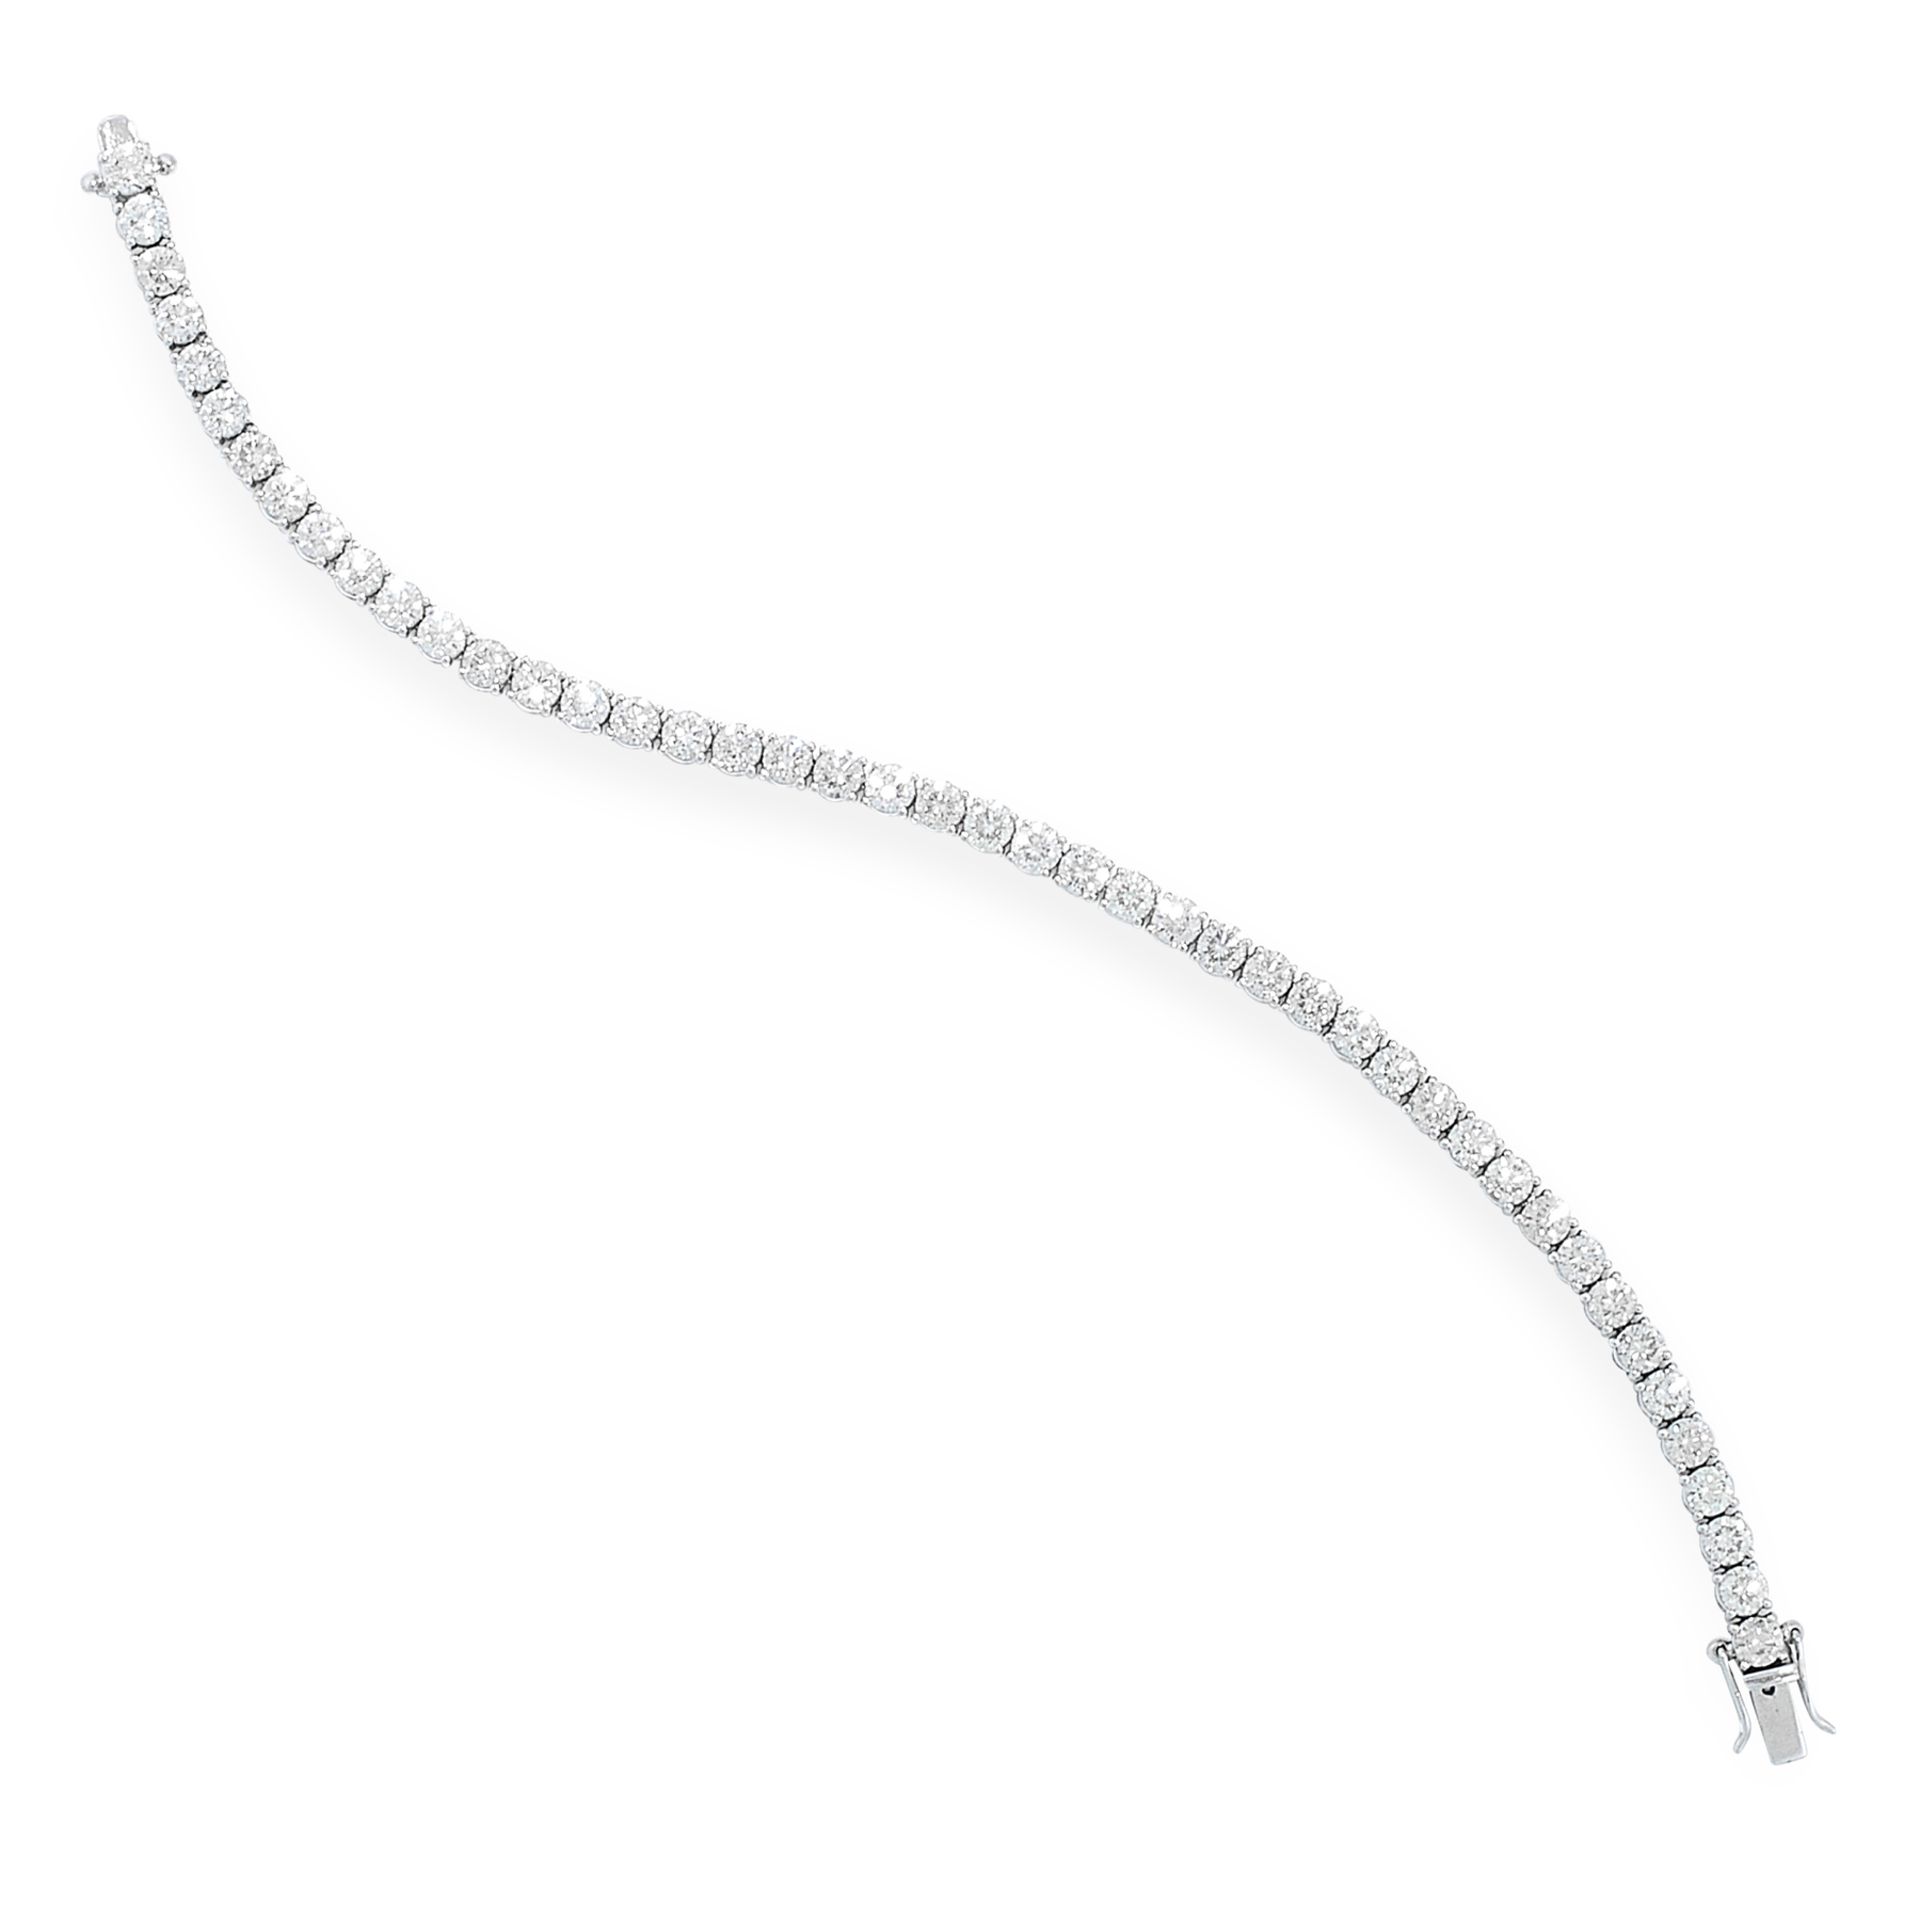 A 10.55 CARAT DIAMOND LINE BRACELET in 18ct white gold, comprising a single row of round cut